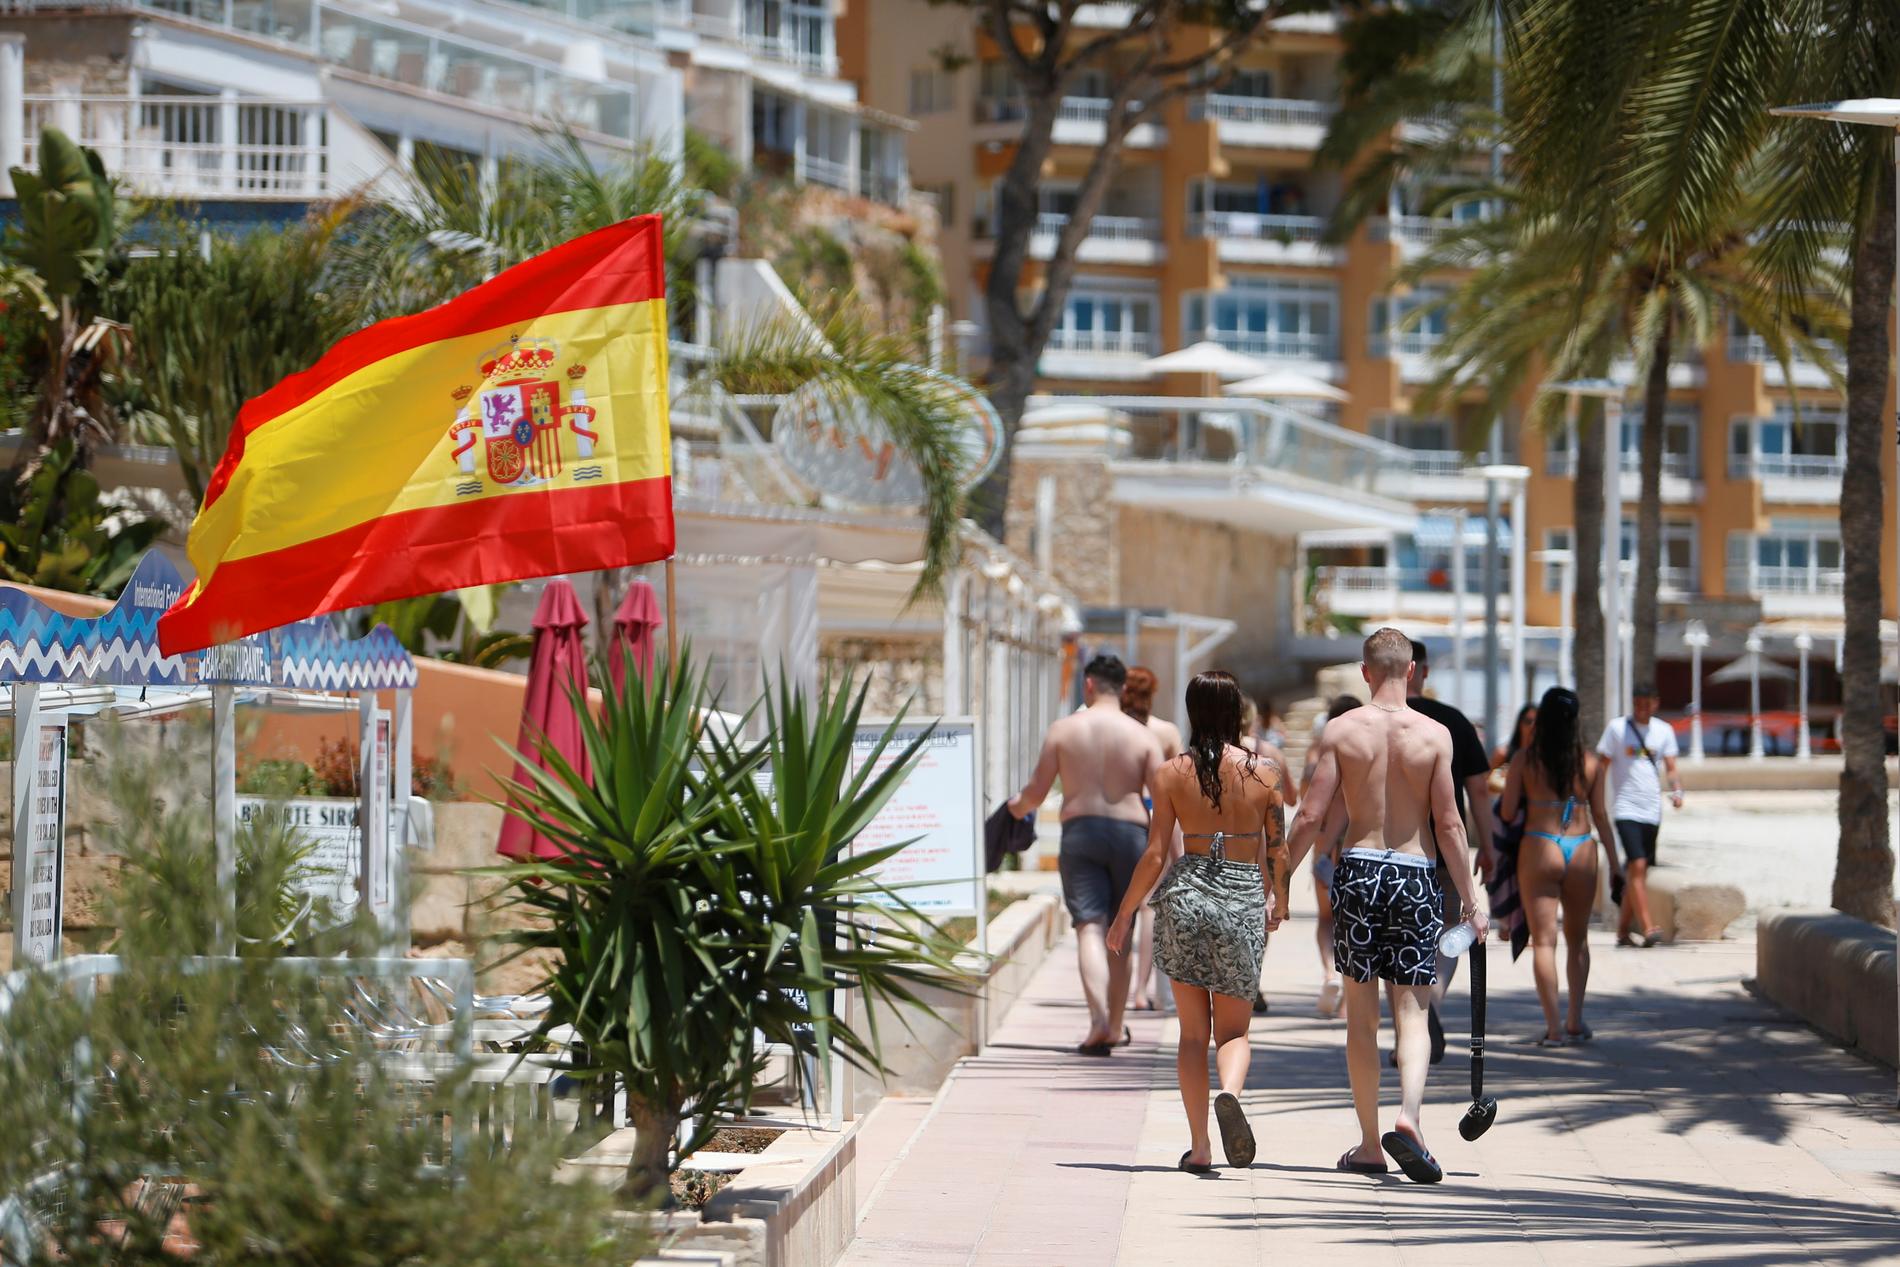 Rising Luxury Home Prices in Mallorca Driven by Foreign Buyers, Says Bloomberg